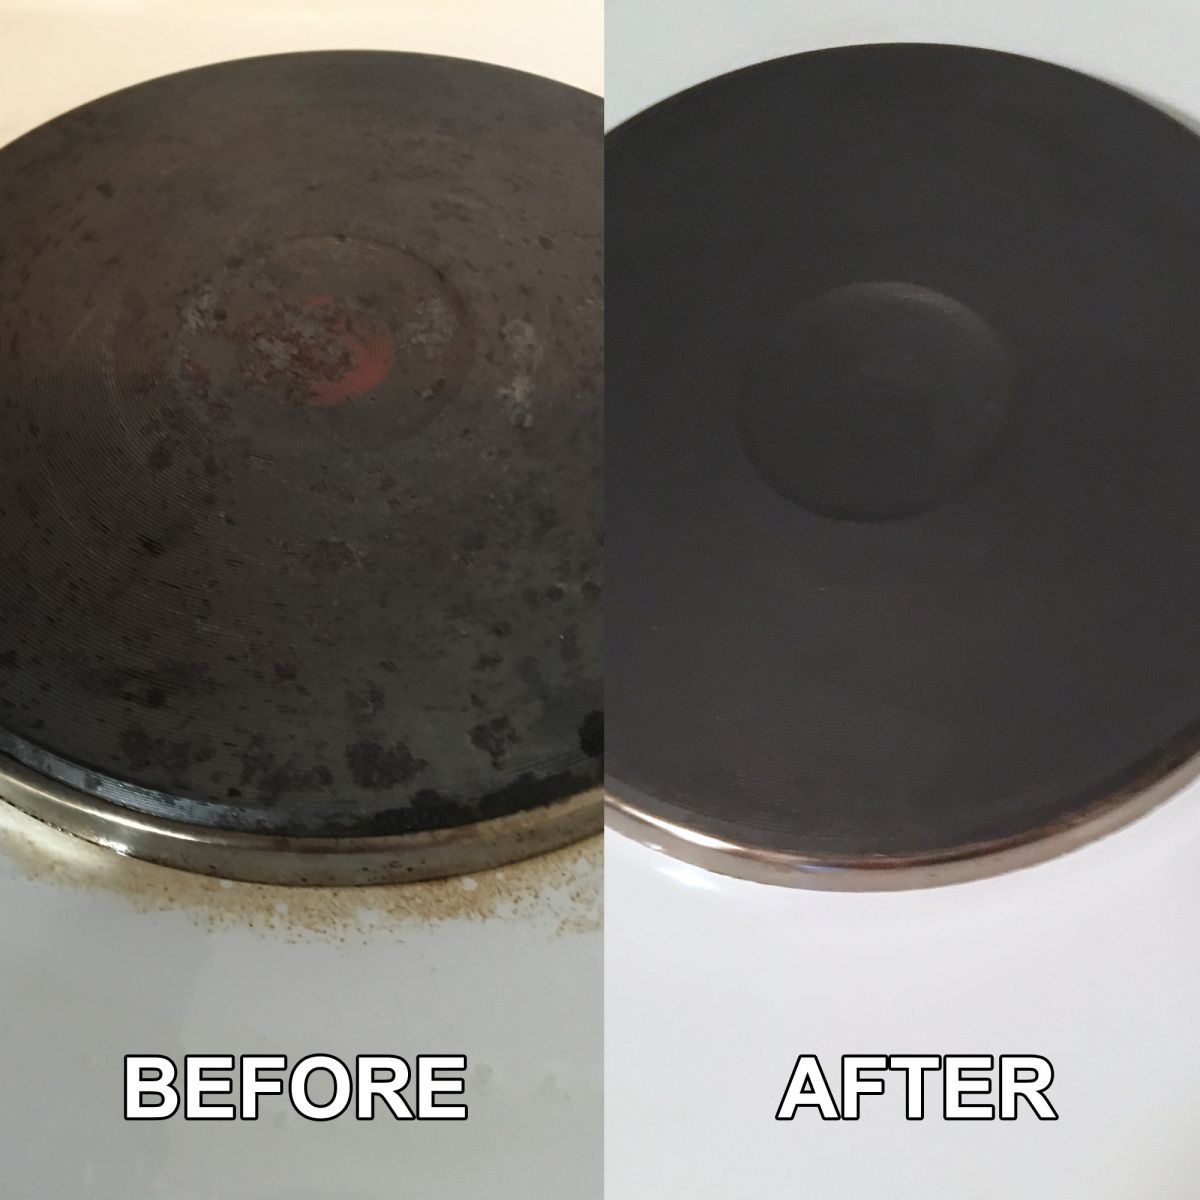 This image is a before and after image of the results from using the Magic Hotpate Restorer